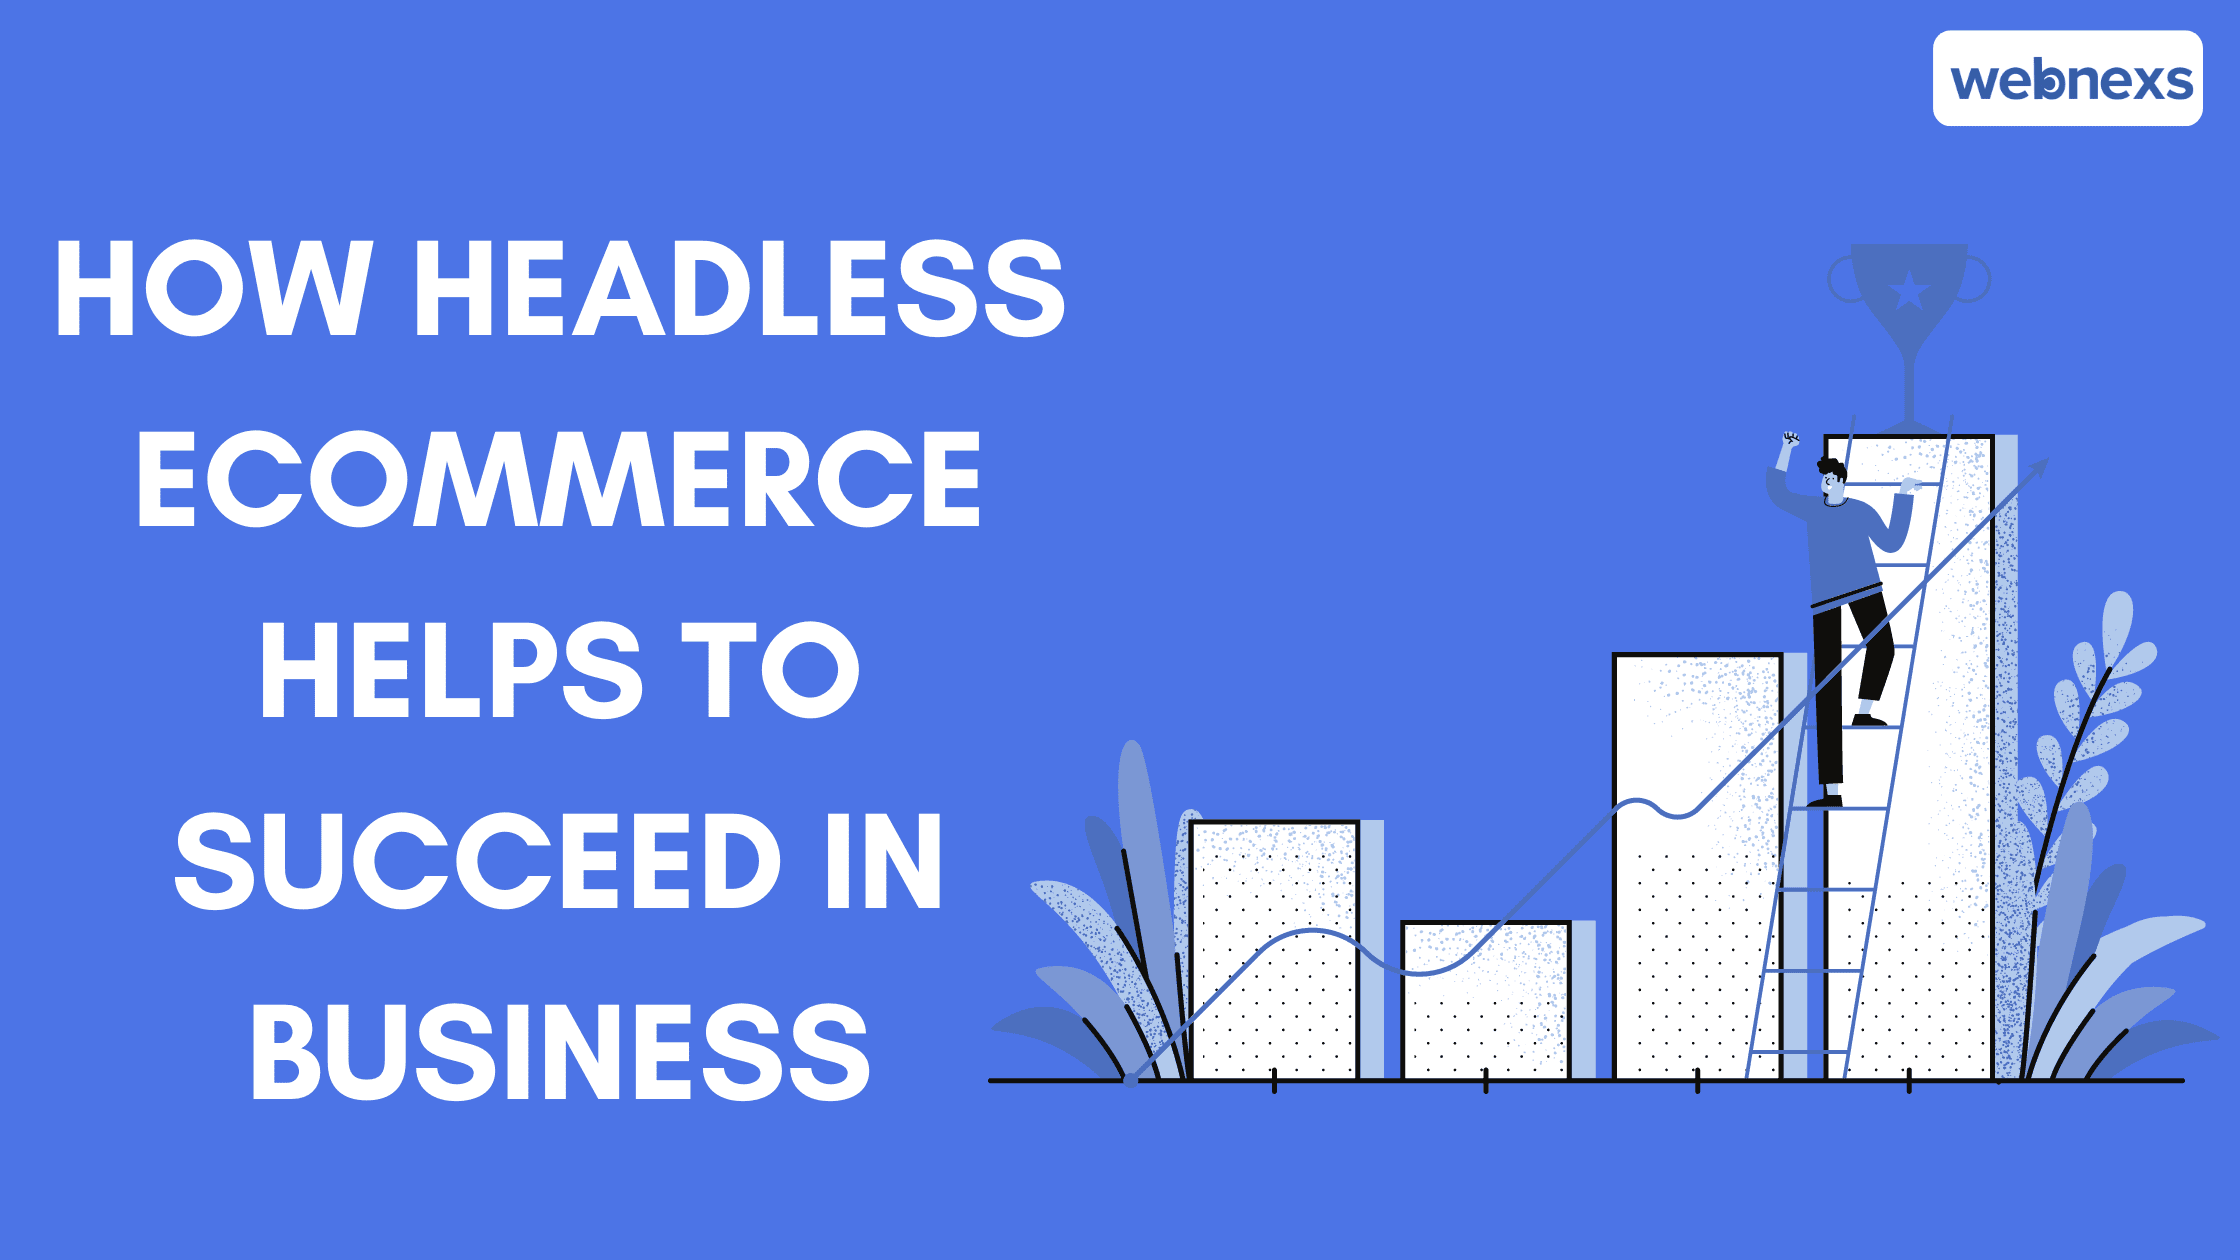 Headless ecommerce helps to succeed in business